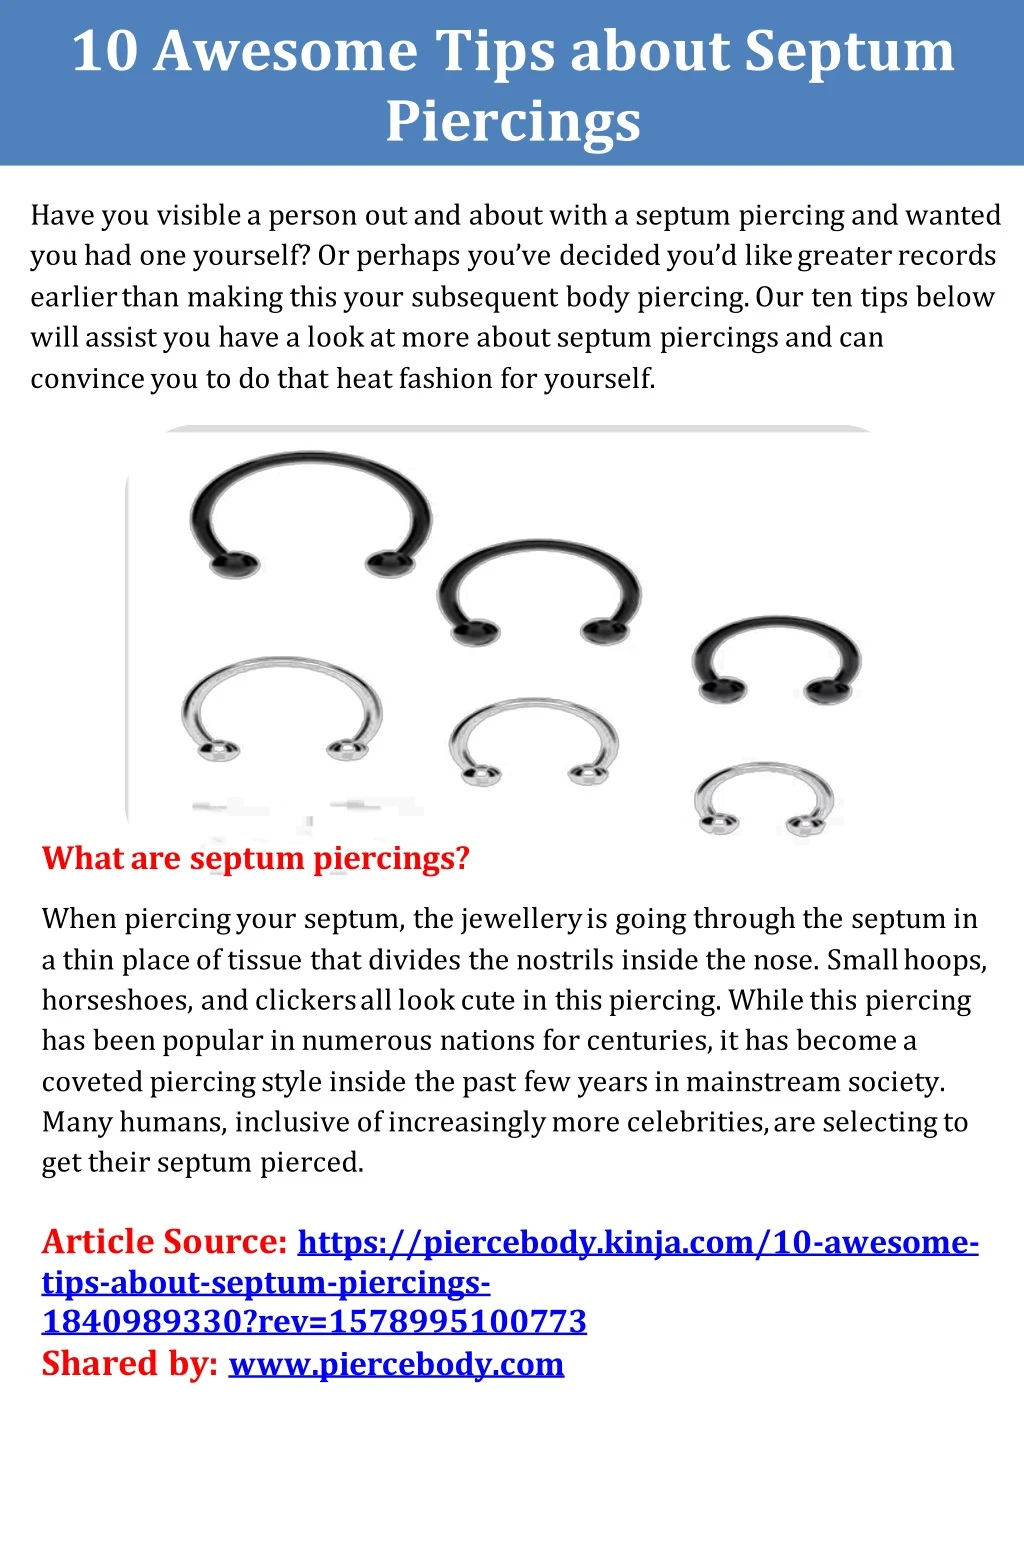 10 awesome tips about septum piercings